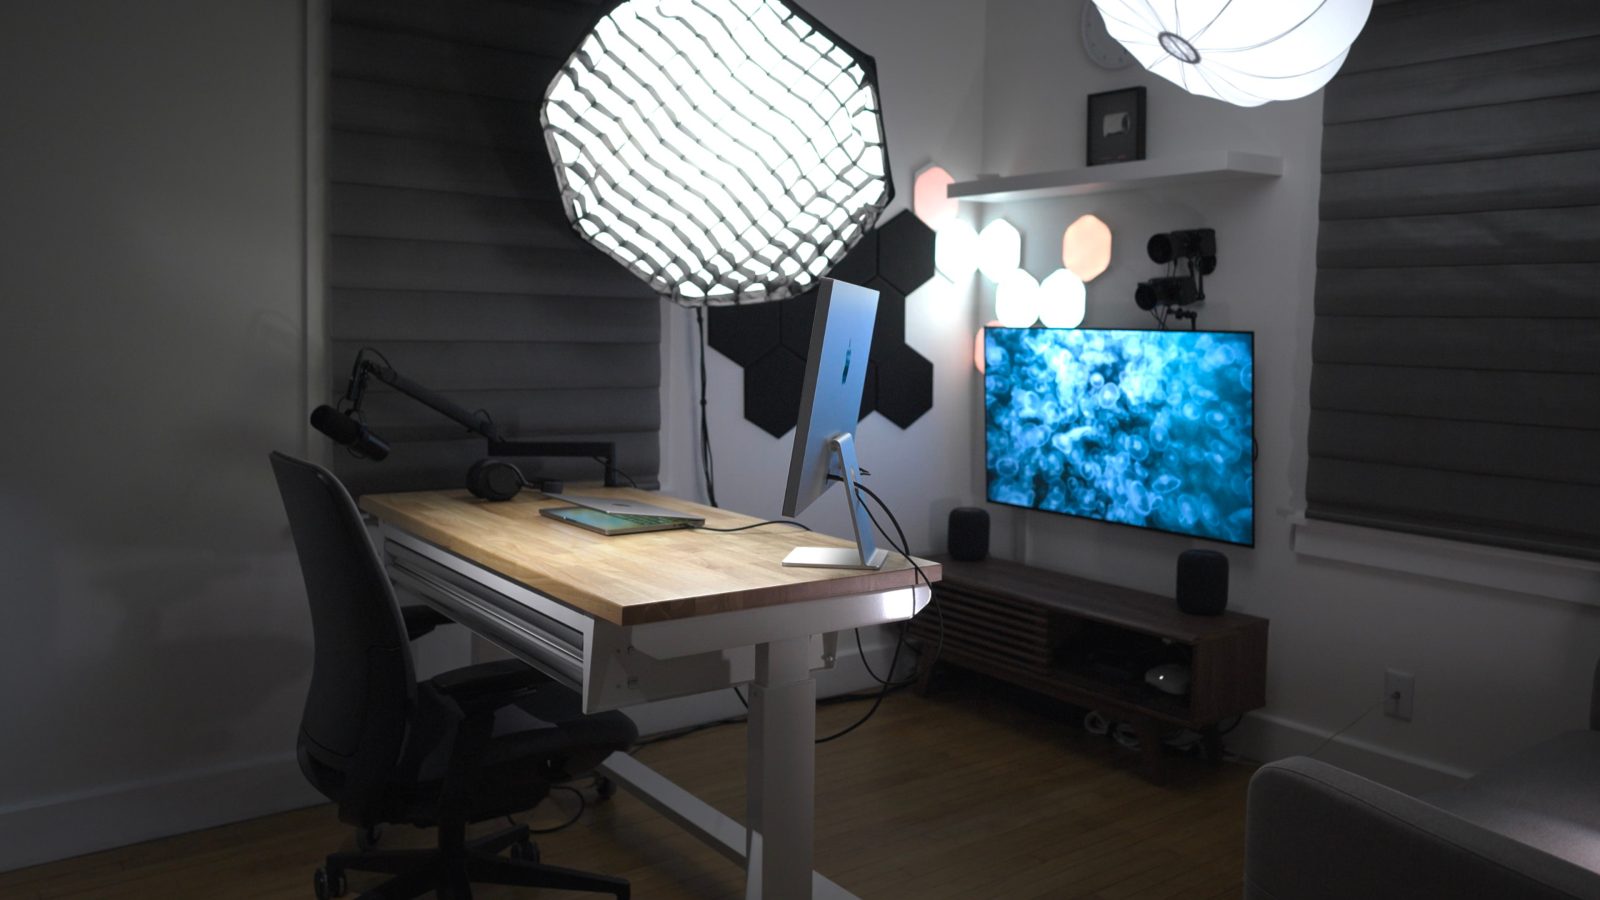 Hands-on: Multi-cam home studio – powered by a MacBook Pro and Thunderbolt